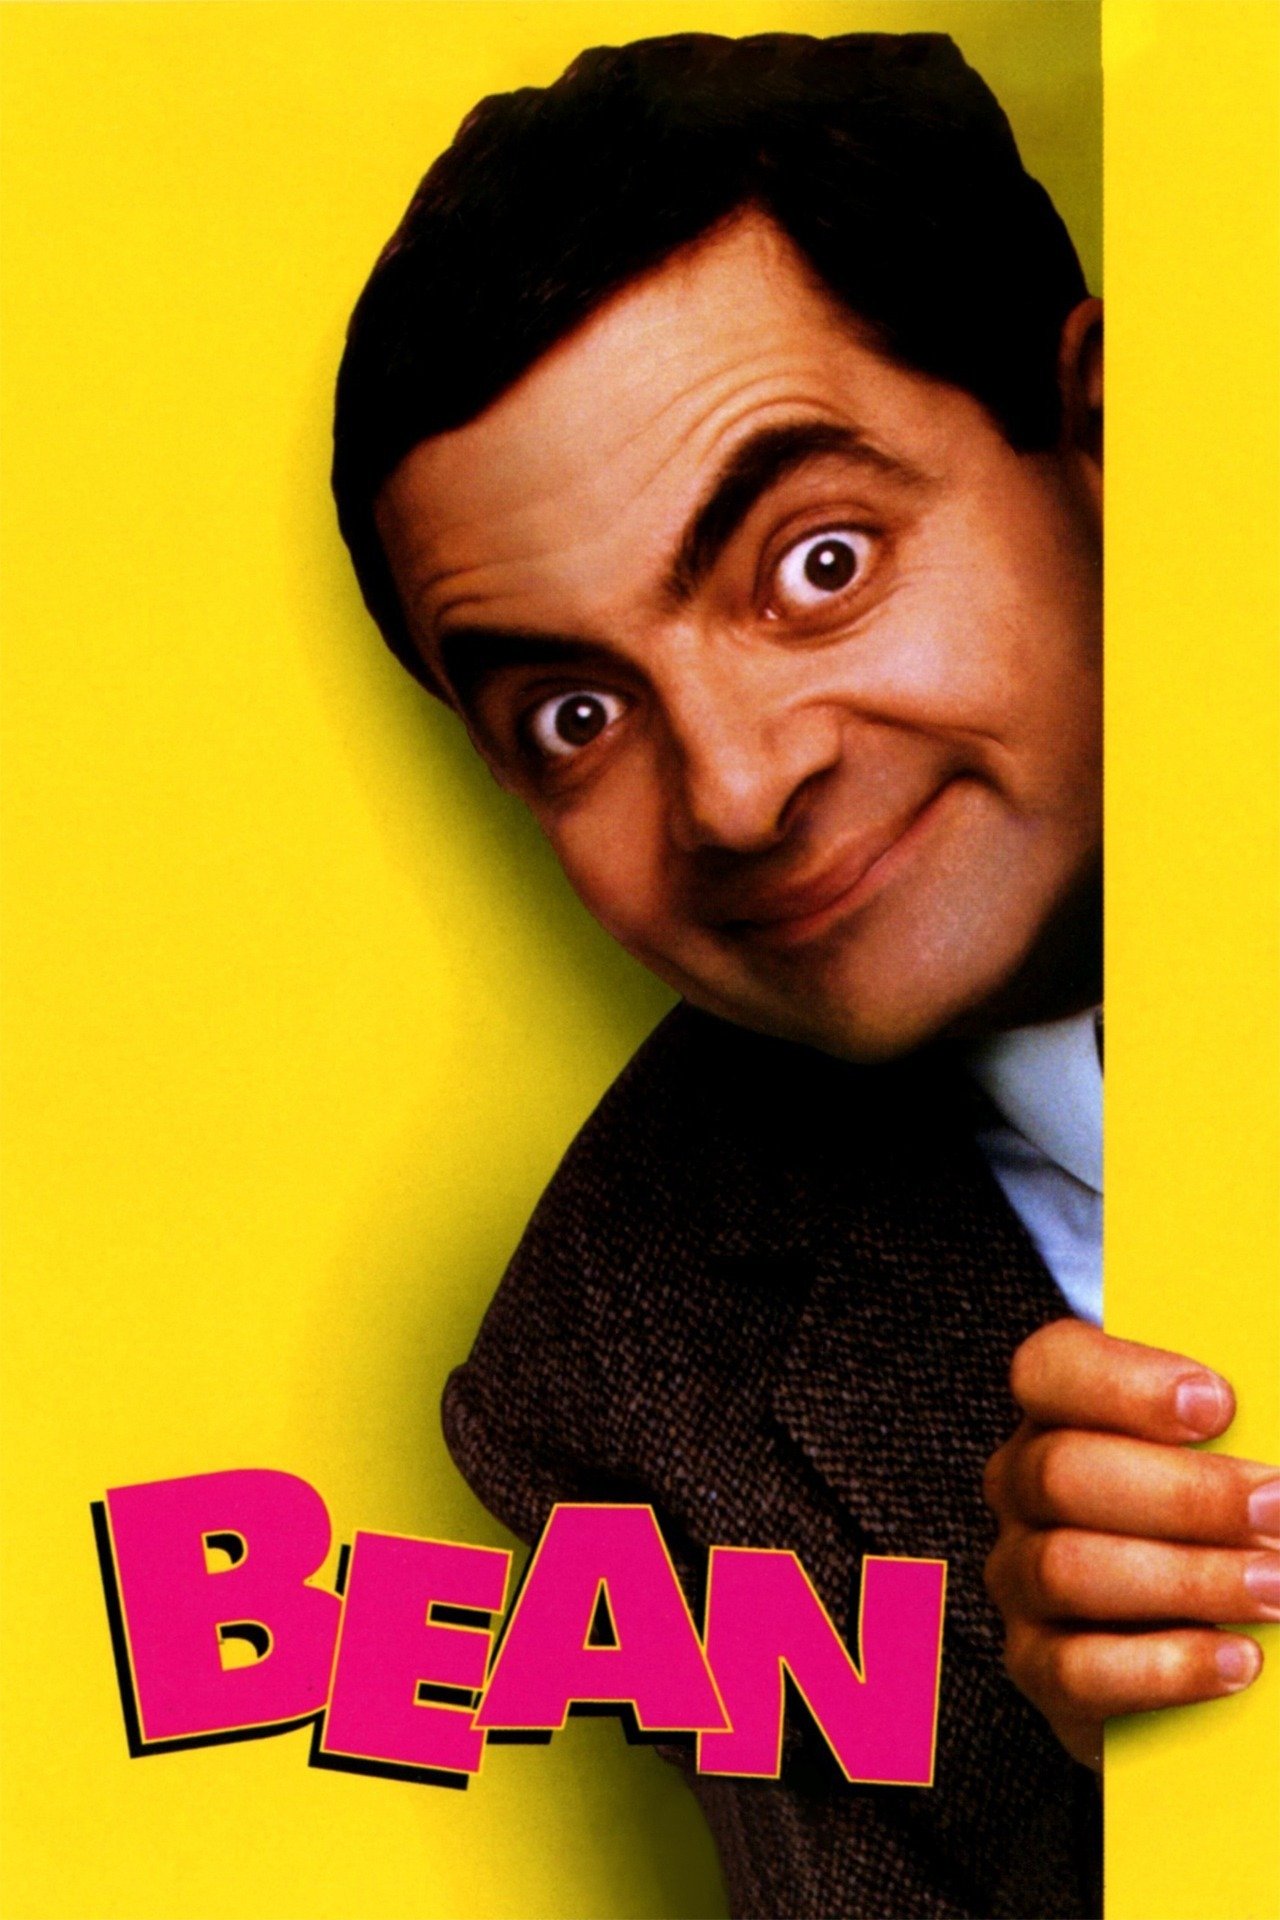 if you know what i mean mr bean